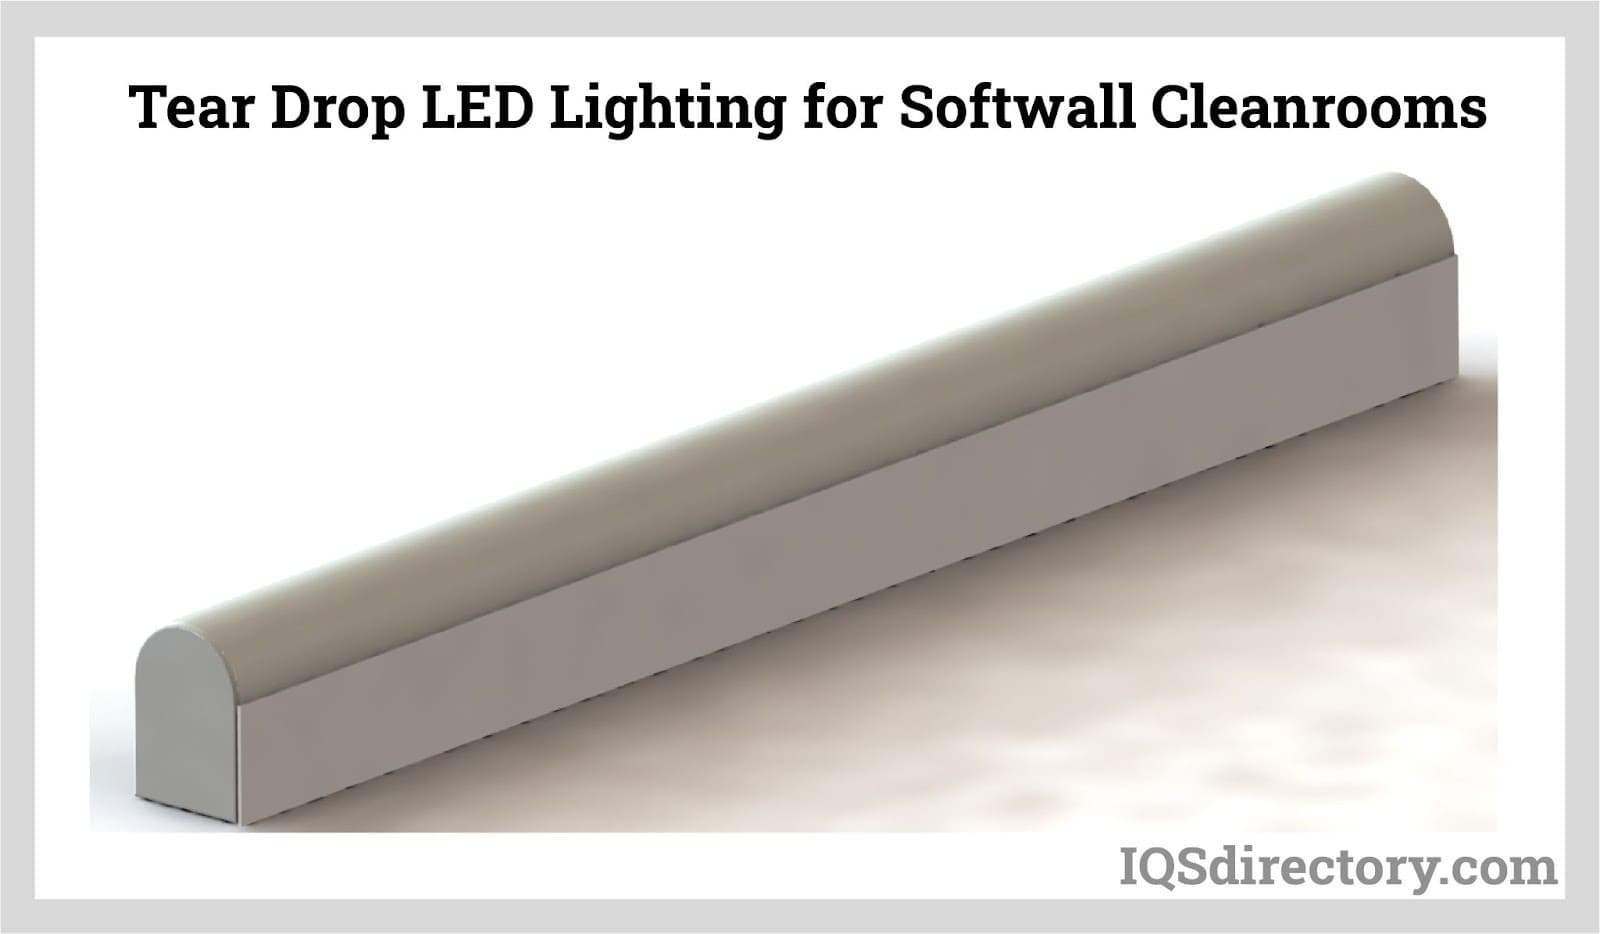 Tear Drop LED Lighting for Softwall Cleanrooms